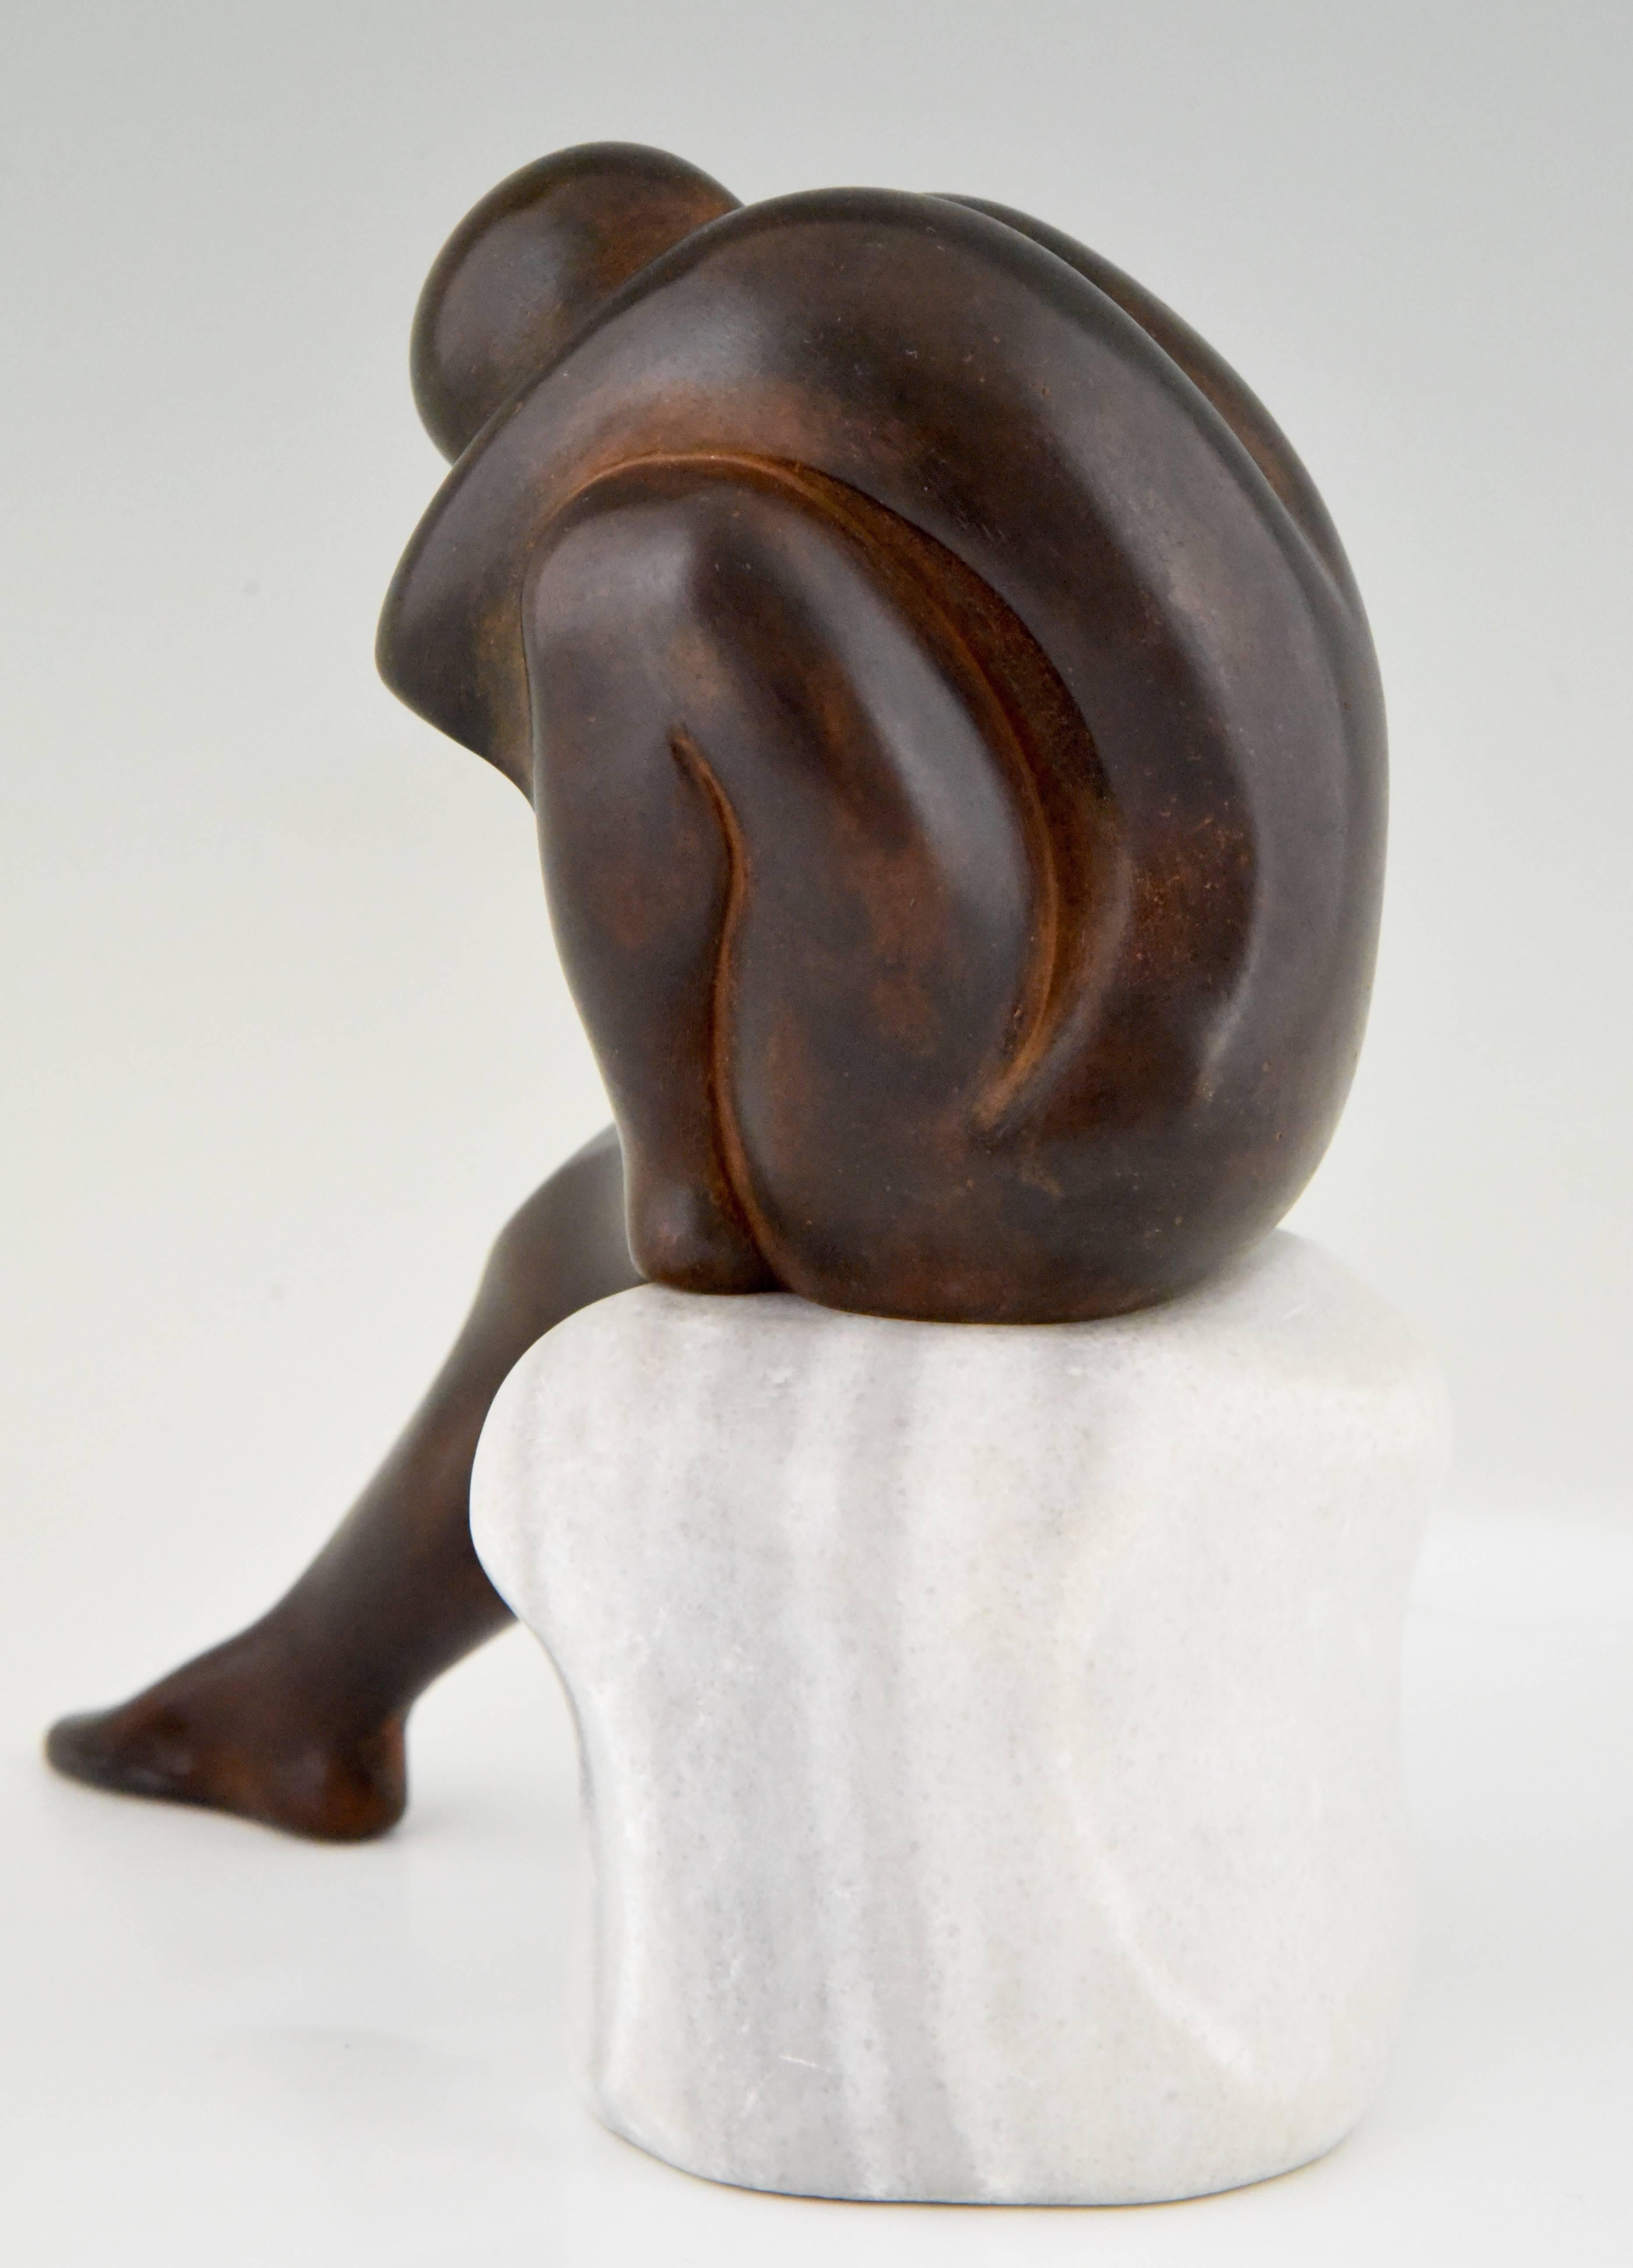 L' Uomo, Bronze Sculpture of a Sitting Man Marble Base by Selvino Cavezza, 1985 1